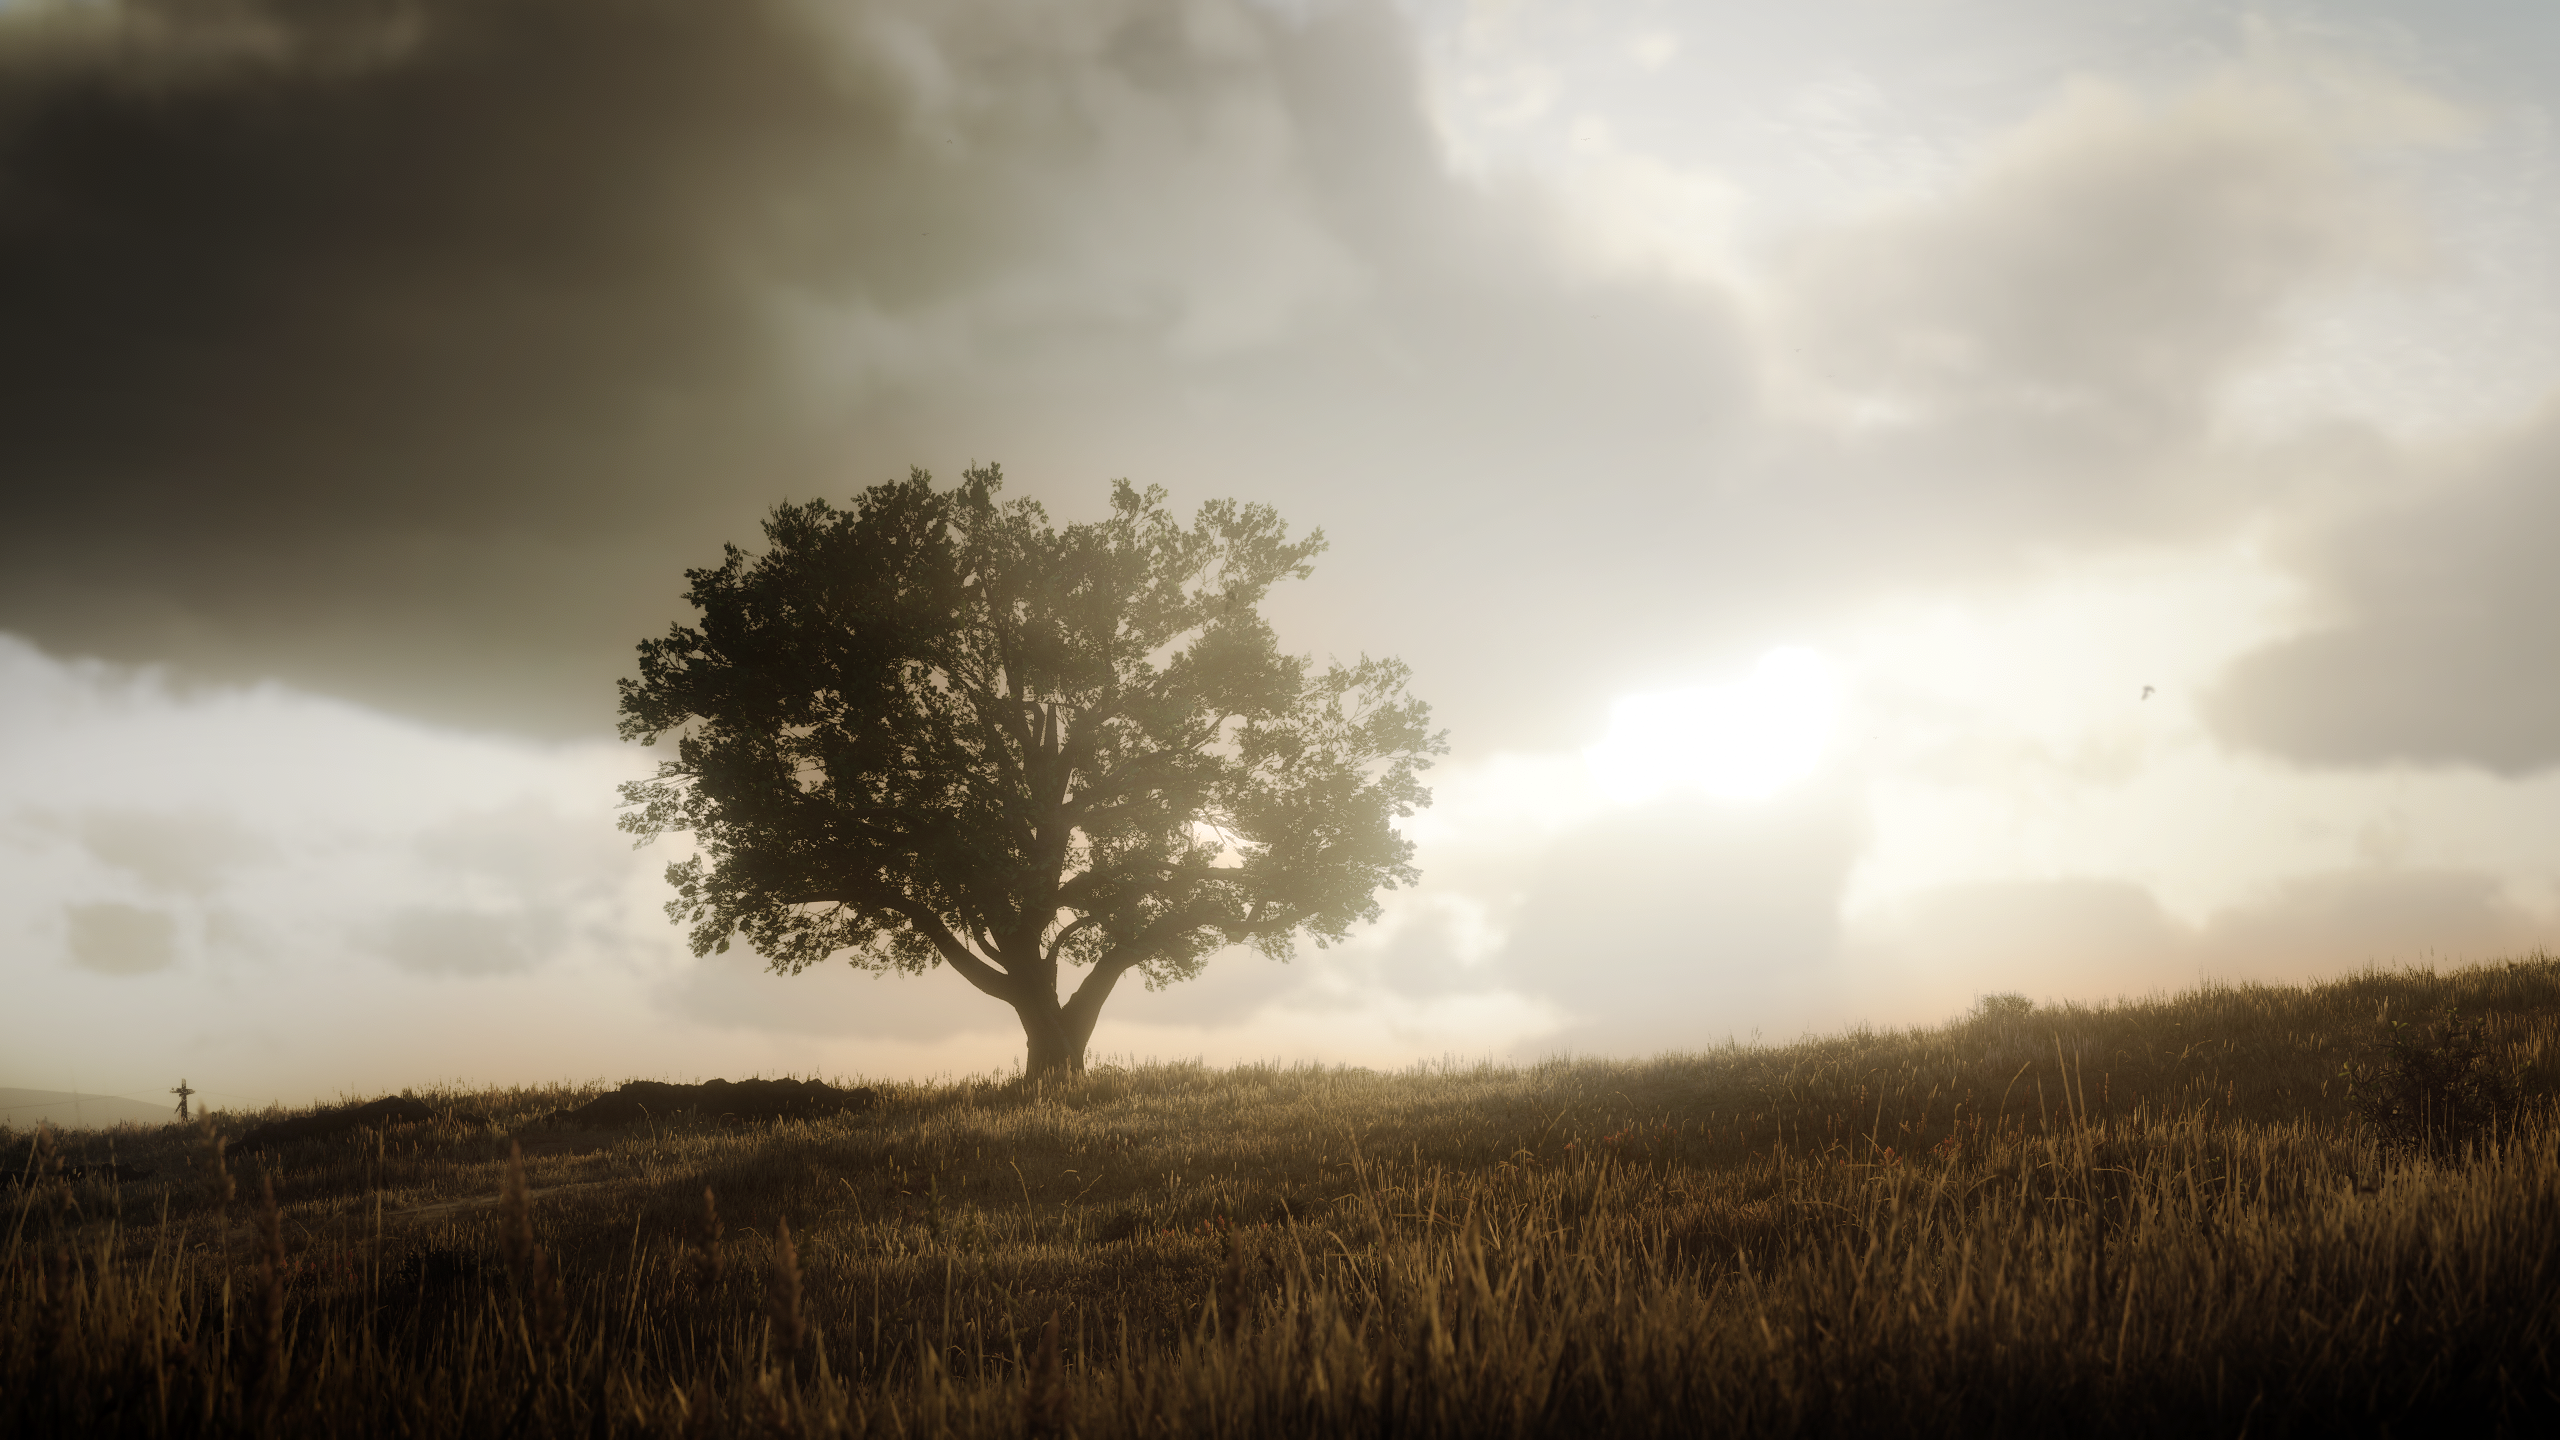 Red Dead Redemption 2 High Noon Trees Forest Daylight Grass Dry Digital Art 2560x1440